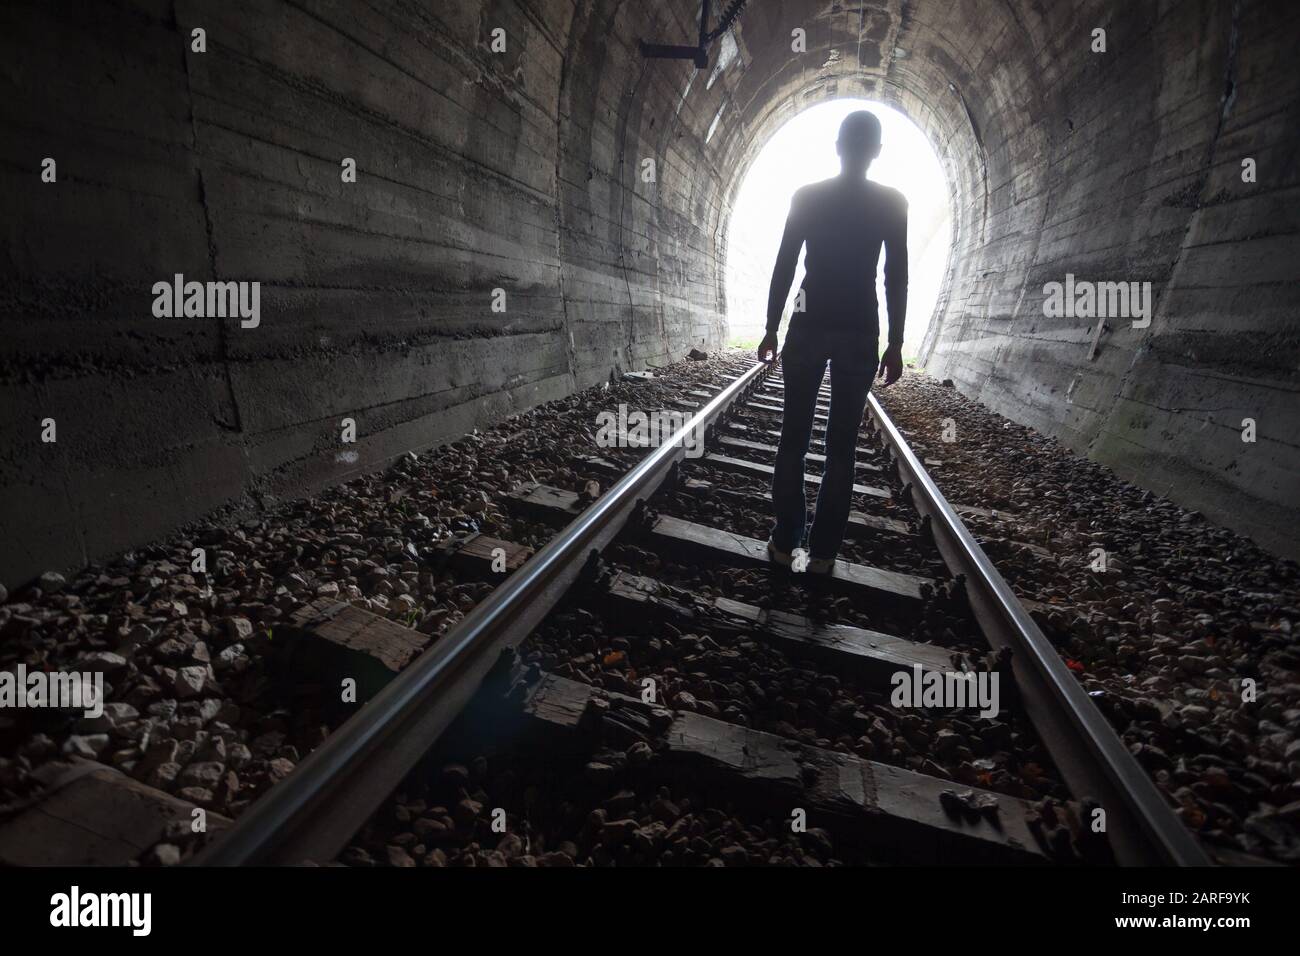 Man silhouetted in a tunnel standing in the center of the railway tracks looking towards the light at the end of the tunnel in a conceptual image. Stock Photo